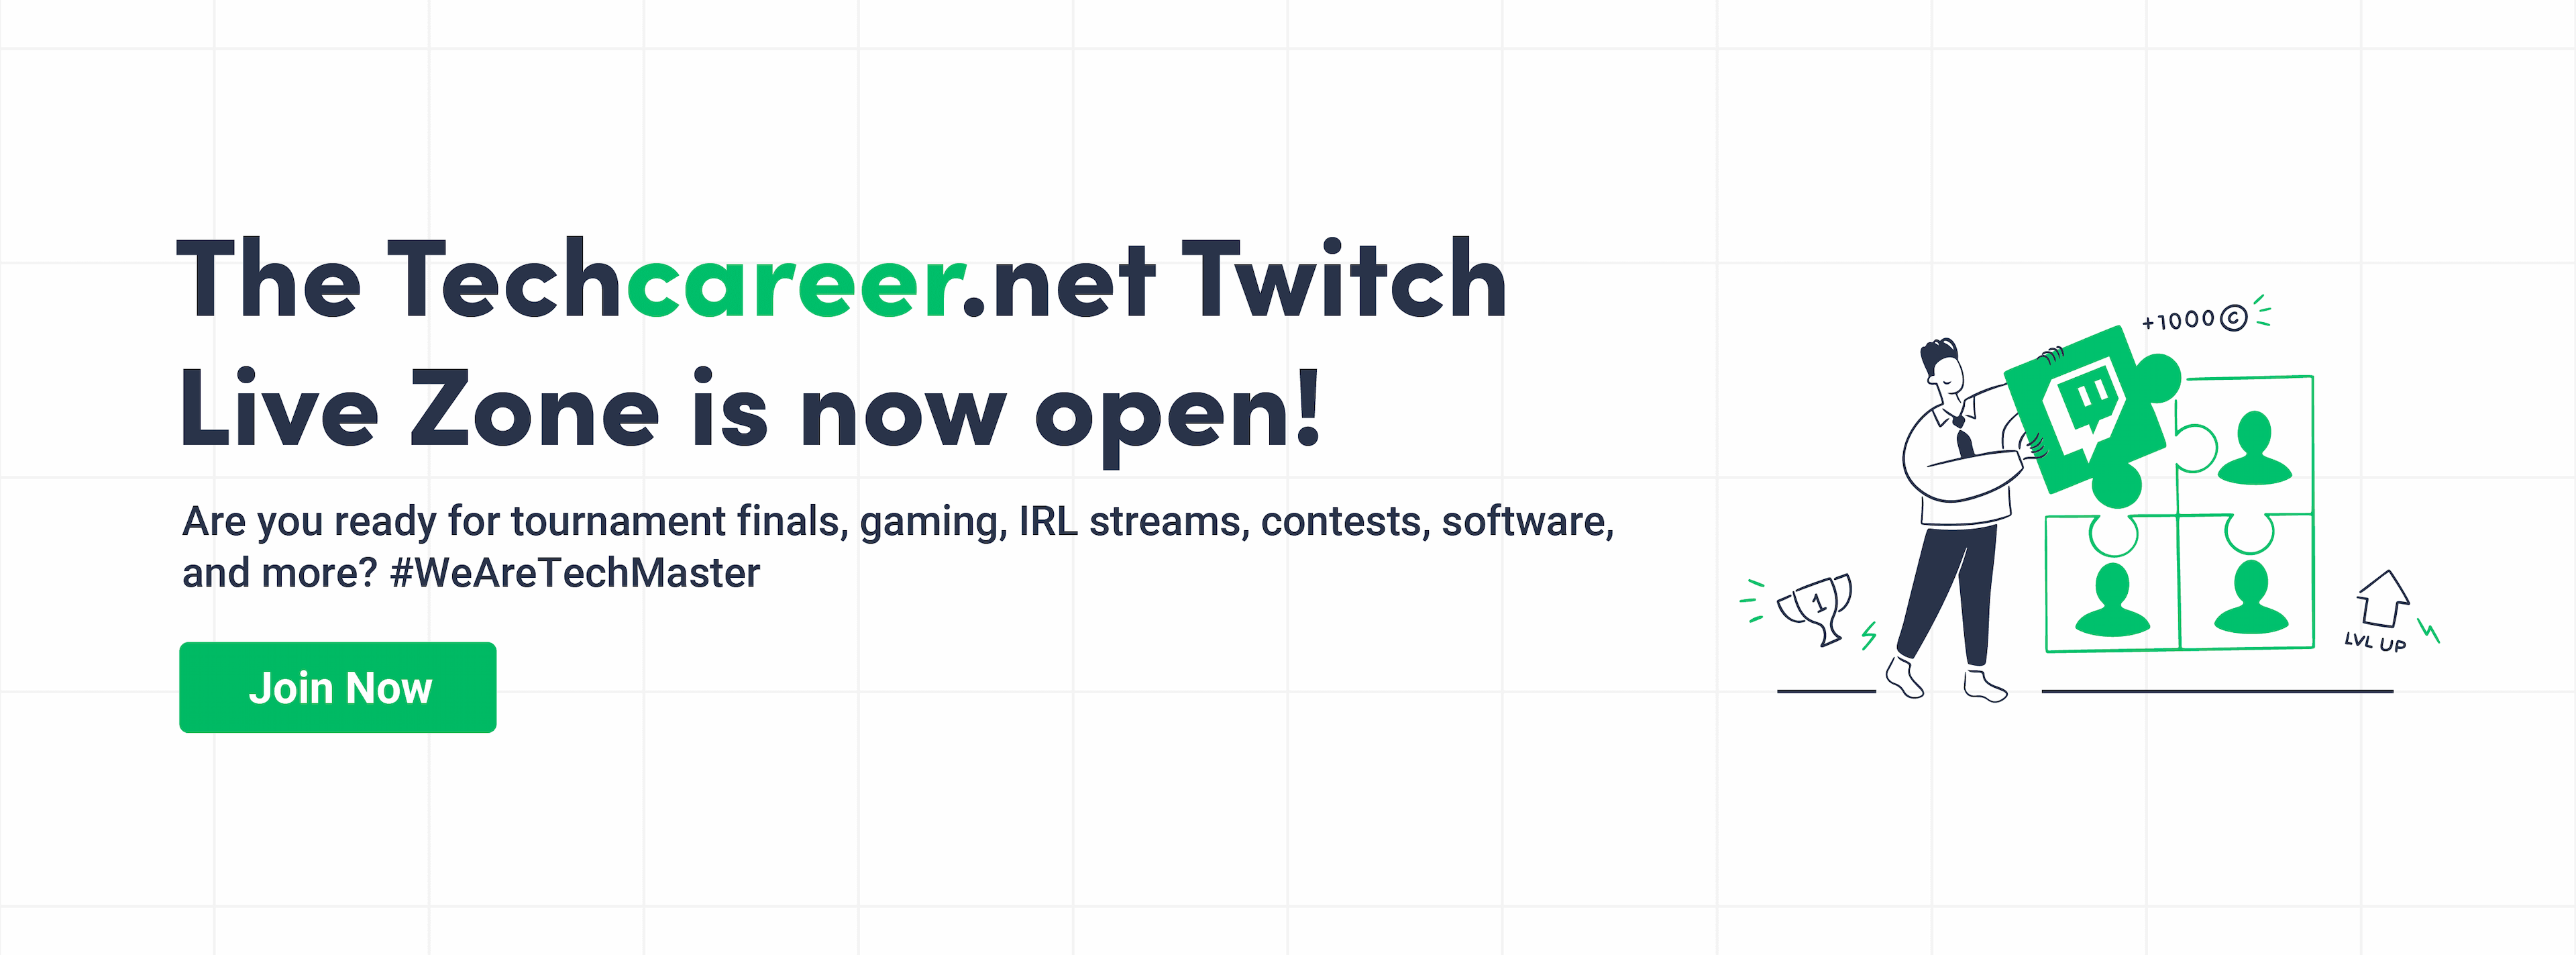 Introducing our brand new platform: Techcareer.net Twitch Live Zone!

We're bringing together tech career enthusiasts with entertainment! Are you ready for tournament finals, thrilling games, real-life broadcasts, competitive contests, in-depth discussions on software topics, and much more?